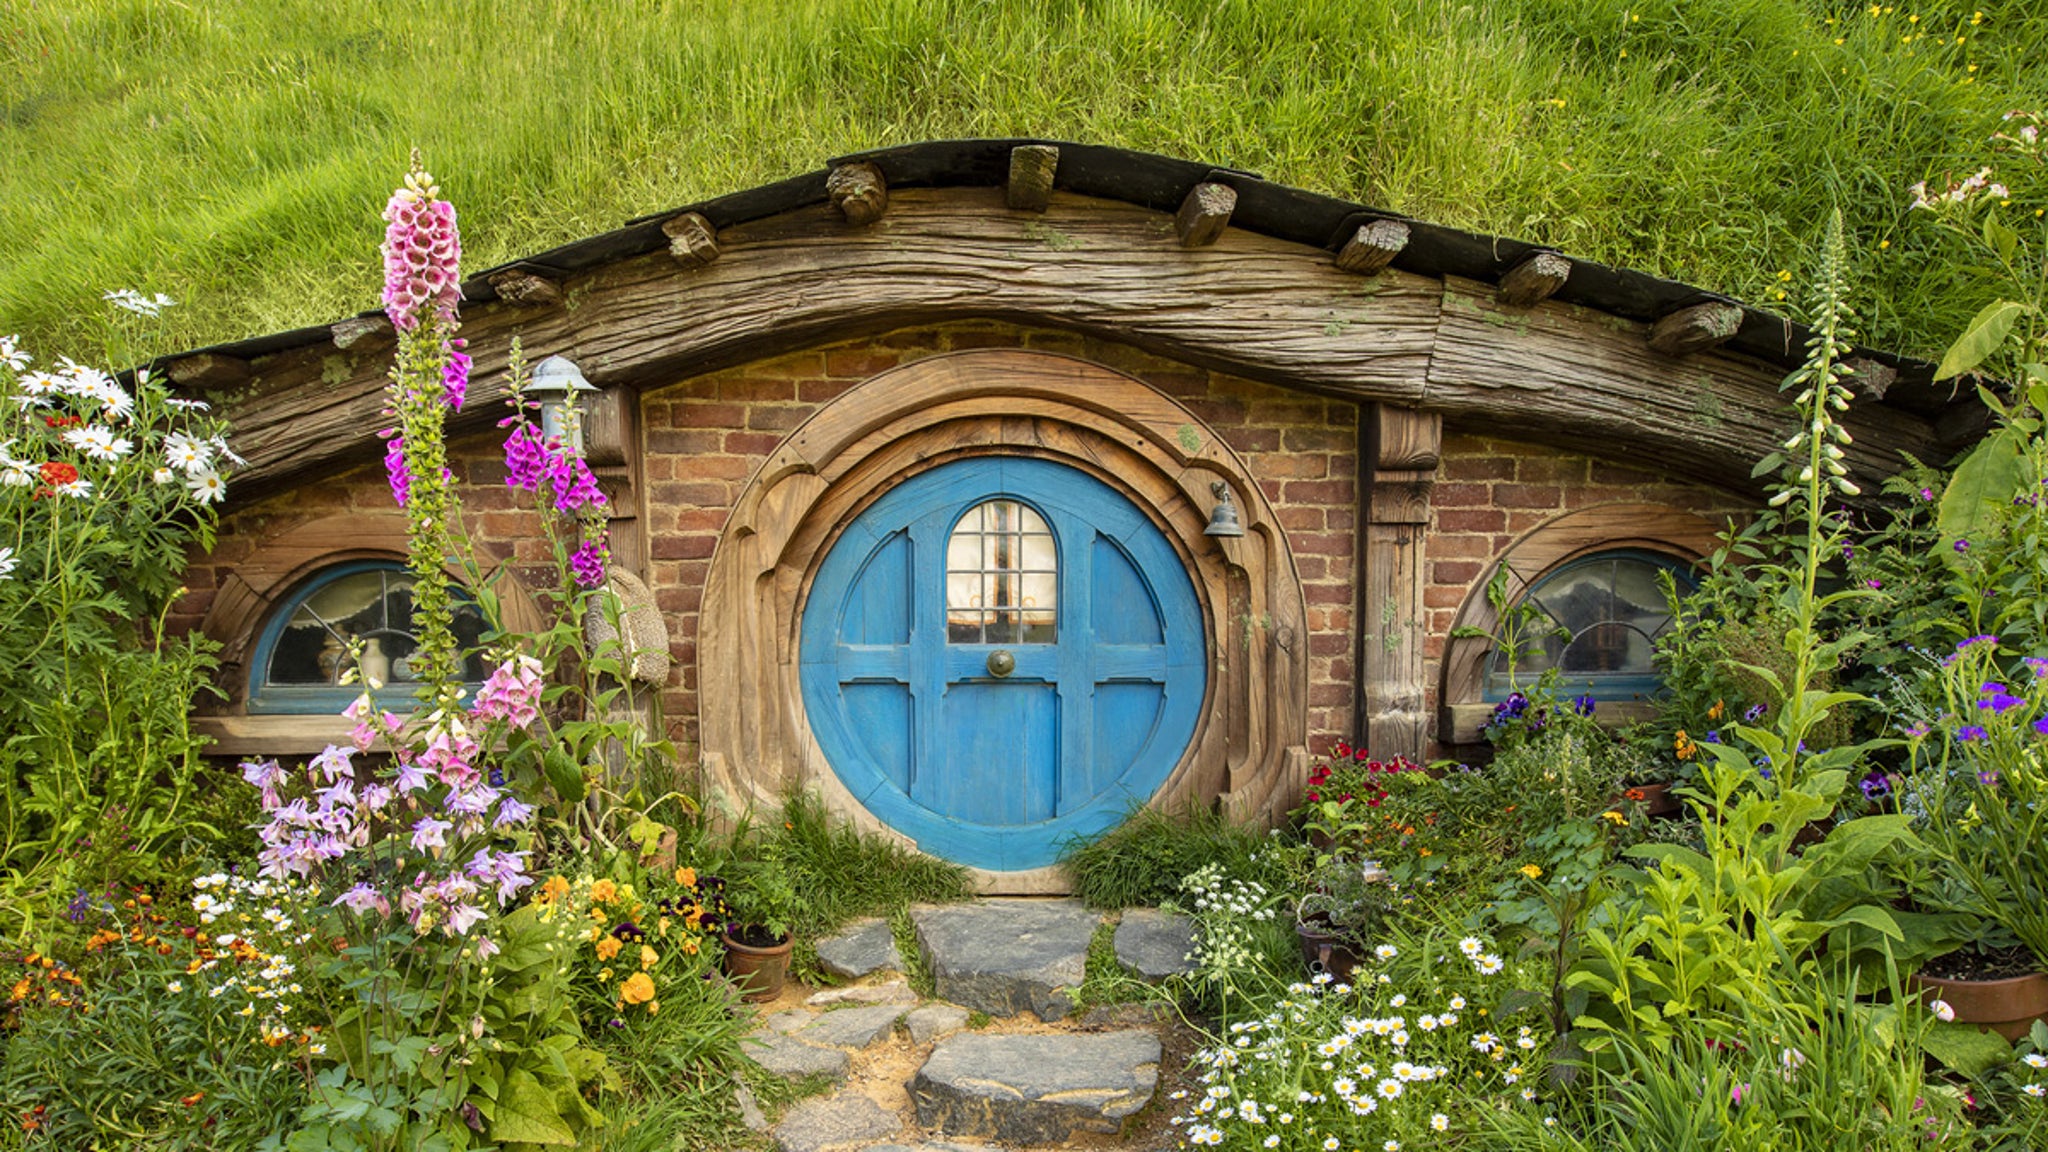 'Lord of the Rings' movie set listed on Airbnb for 2 night stay